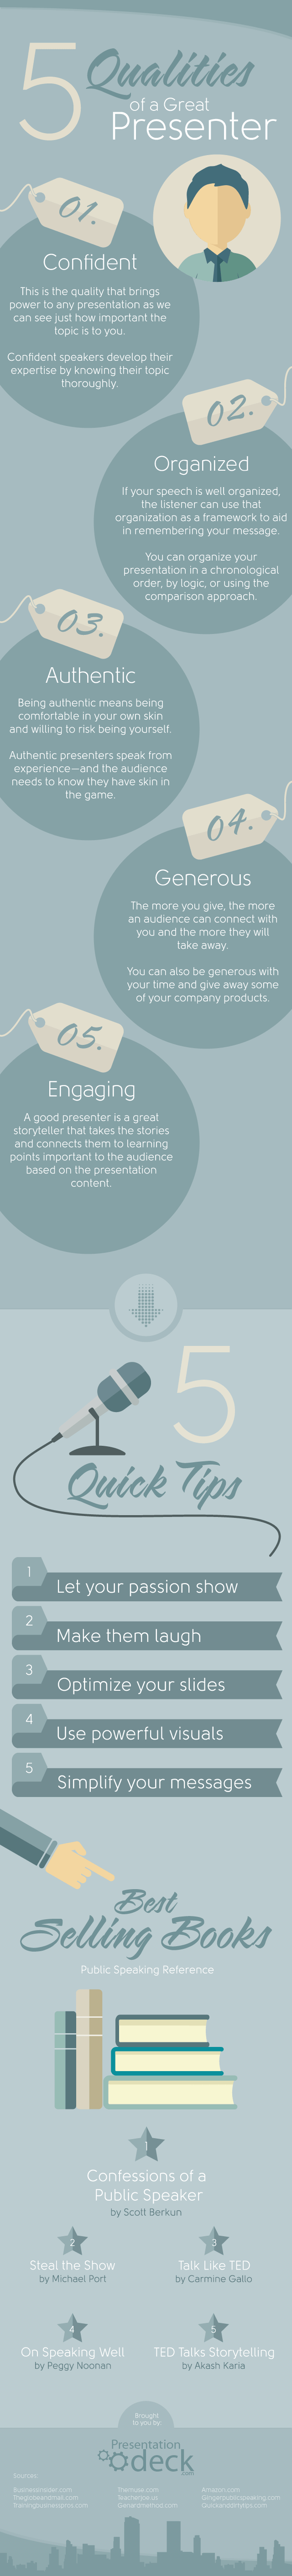 5 Qualities of a Great Presenter Infographic